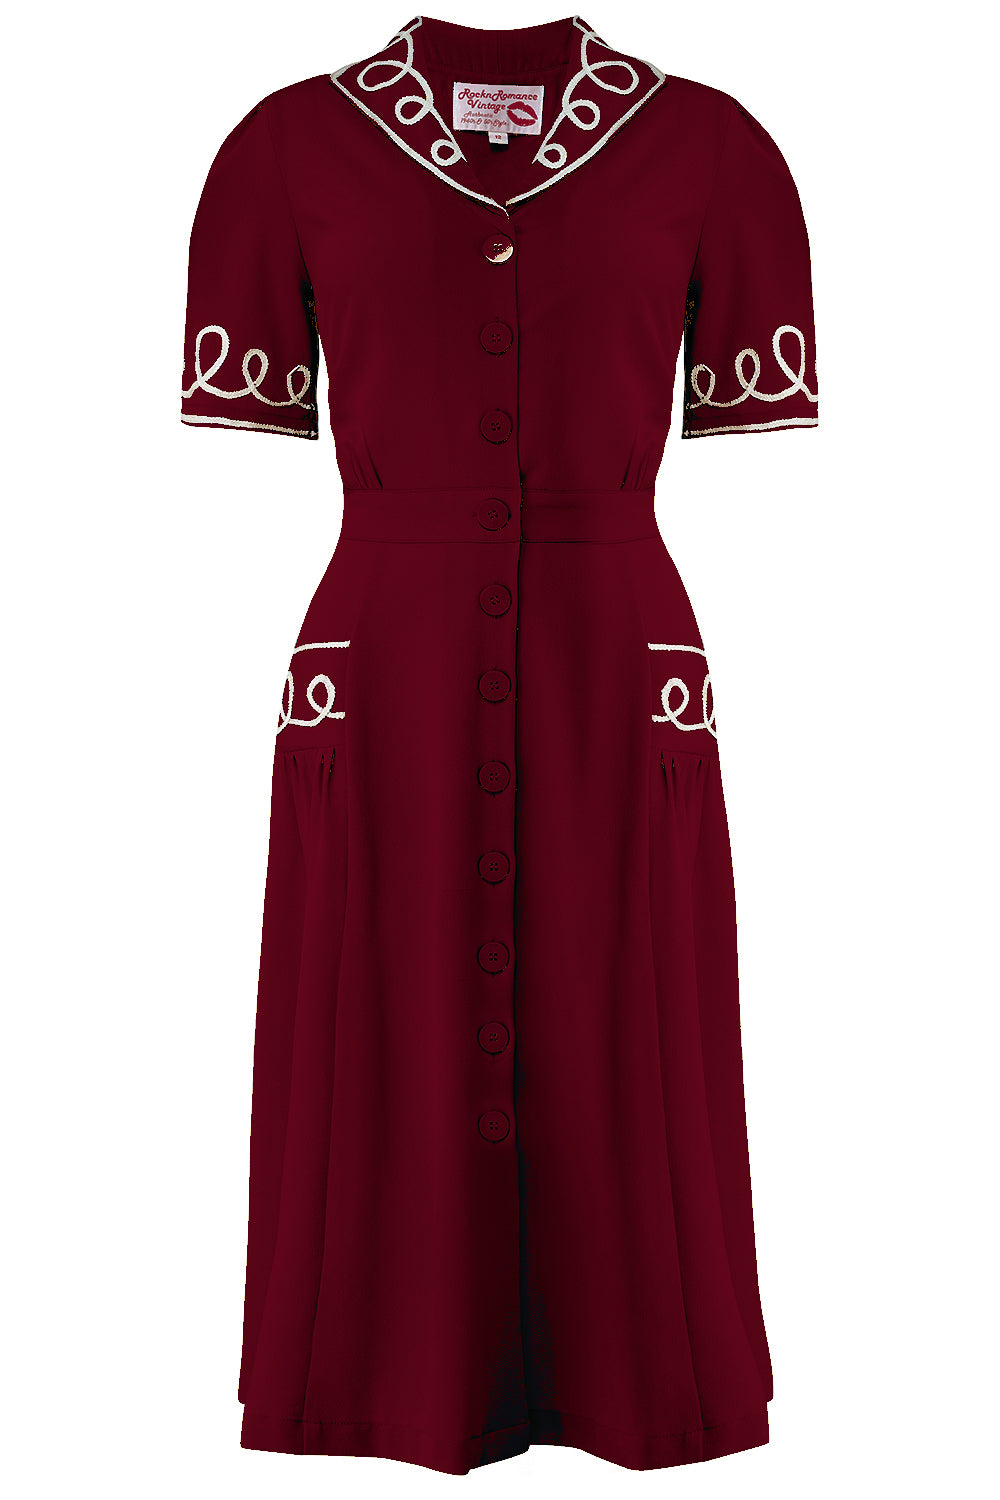 The "Loopy-Lou" Shirtwaister Dress in Wine with Contrast RicRac, True 1950s Vintage Style - True and authentic vintage style clothing, inspired by the Classic styles of CC41 , WW2 and the fun 1950s RocknRoll era, for everyday wear plus events like Goodwood Revival, Twinwood Festival and Viva Las Vegas Rockabilly Weekend Rock n Romance Rock n Romance